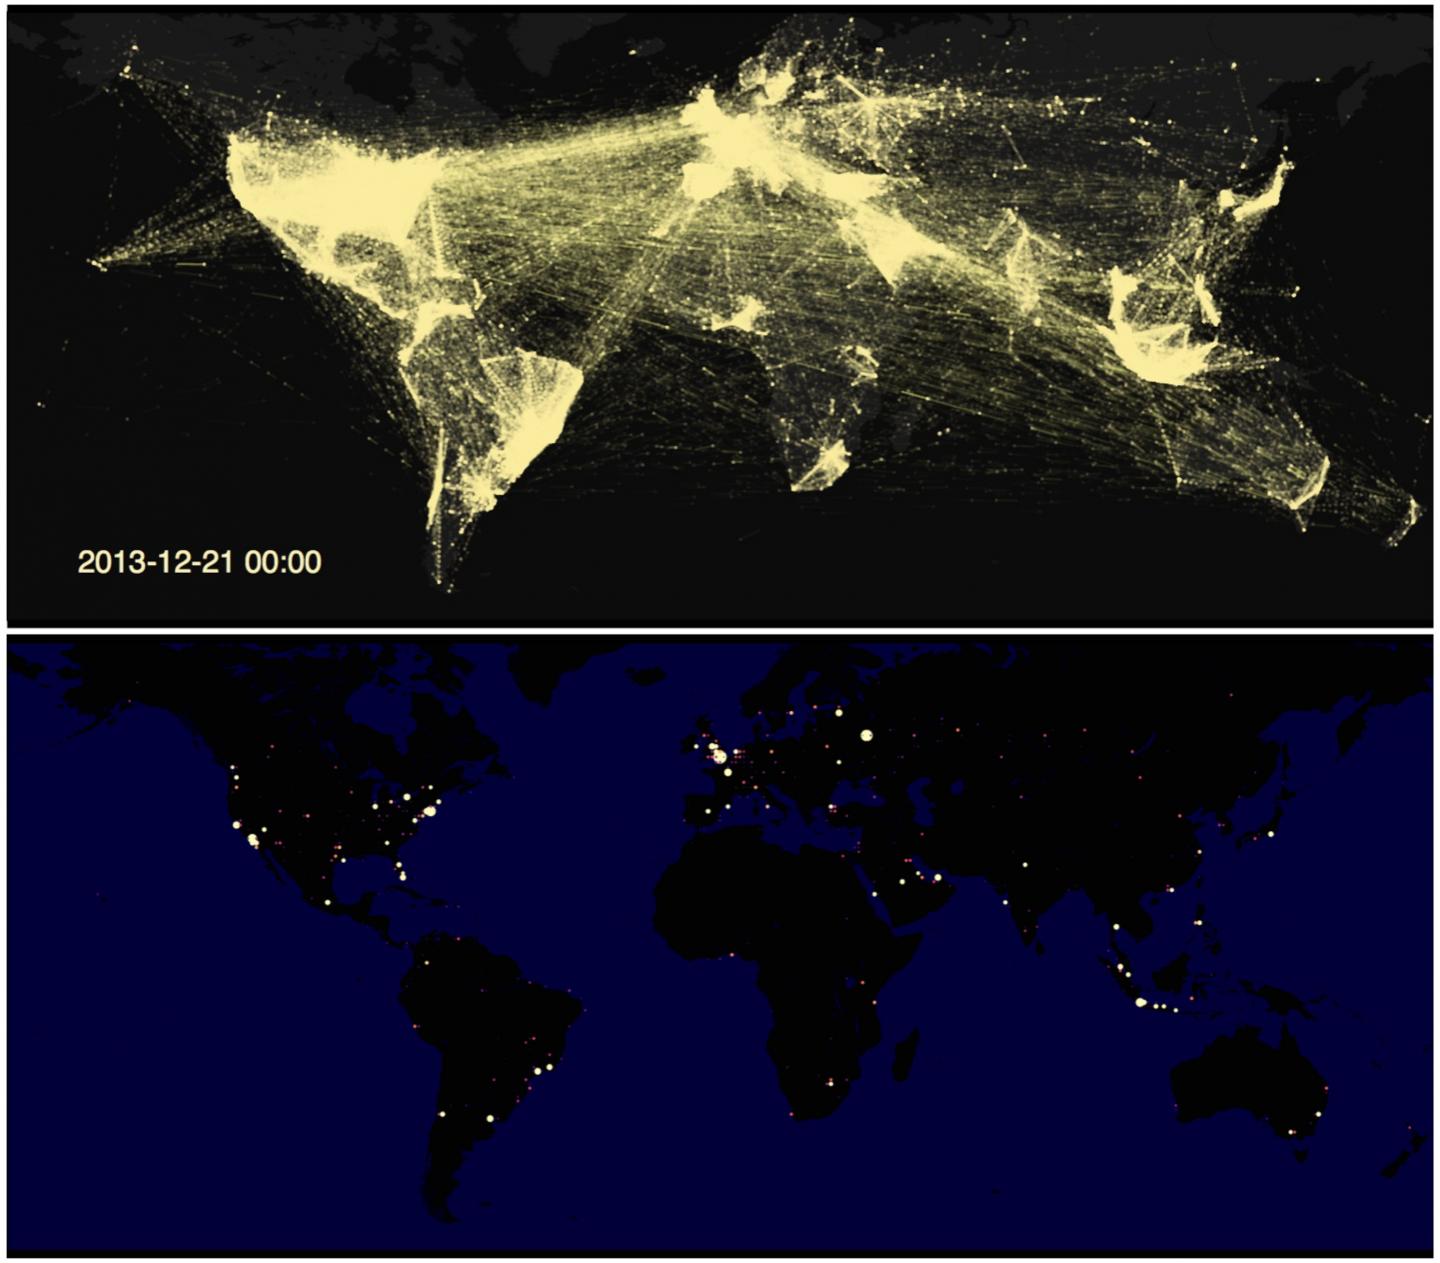 Visualization of the Network Associated with Twitter Global Communication